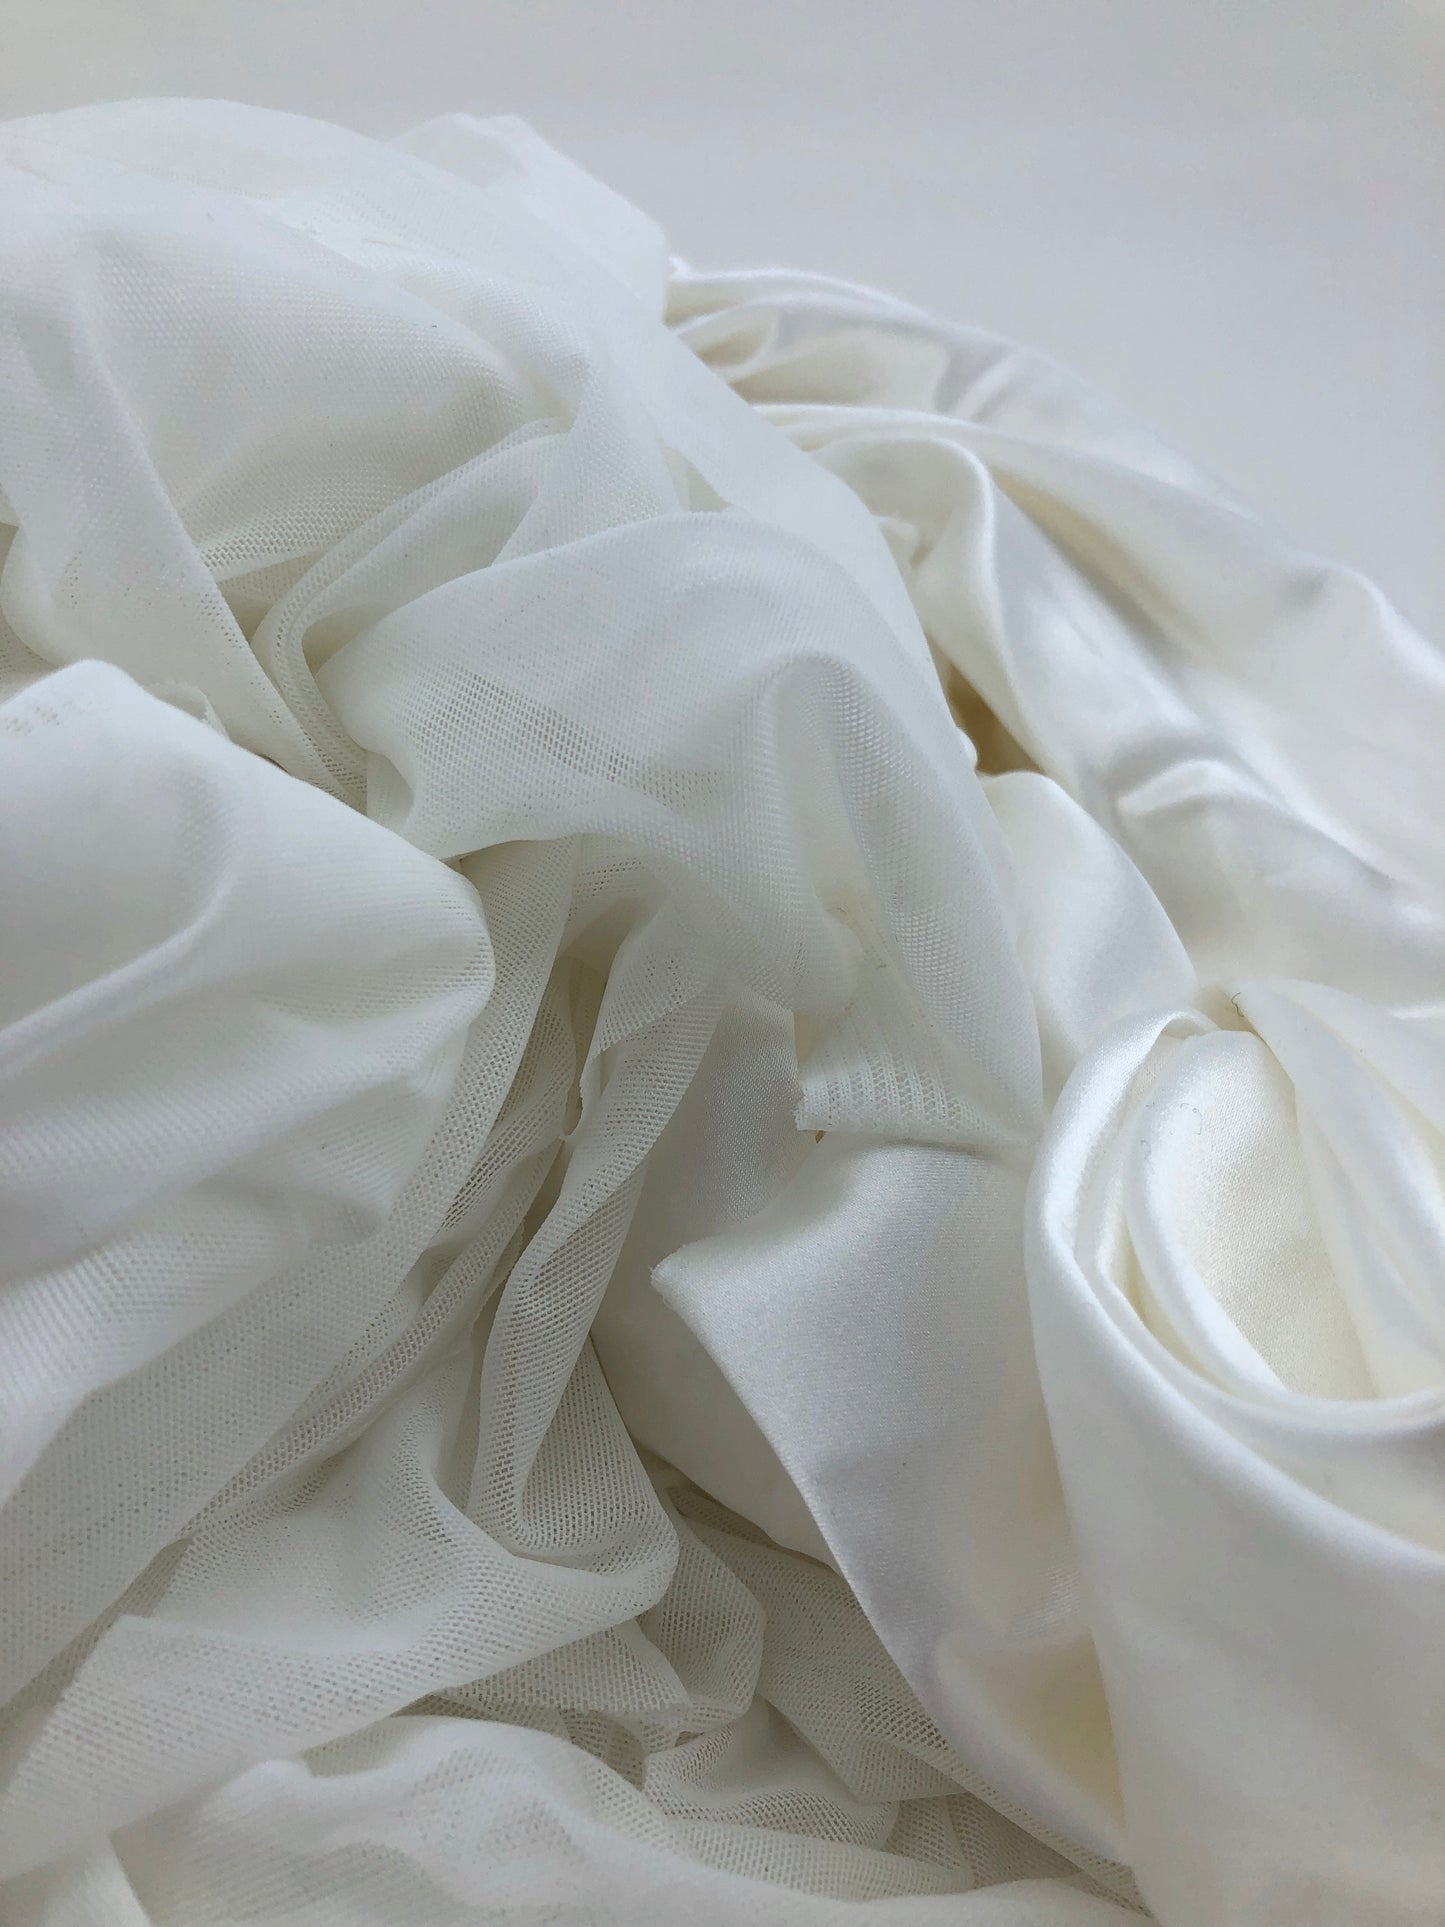 Fabric Pieces, Synthetic Fiber, White